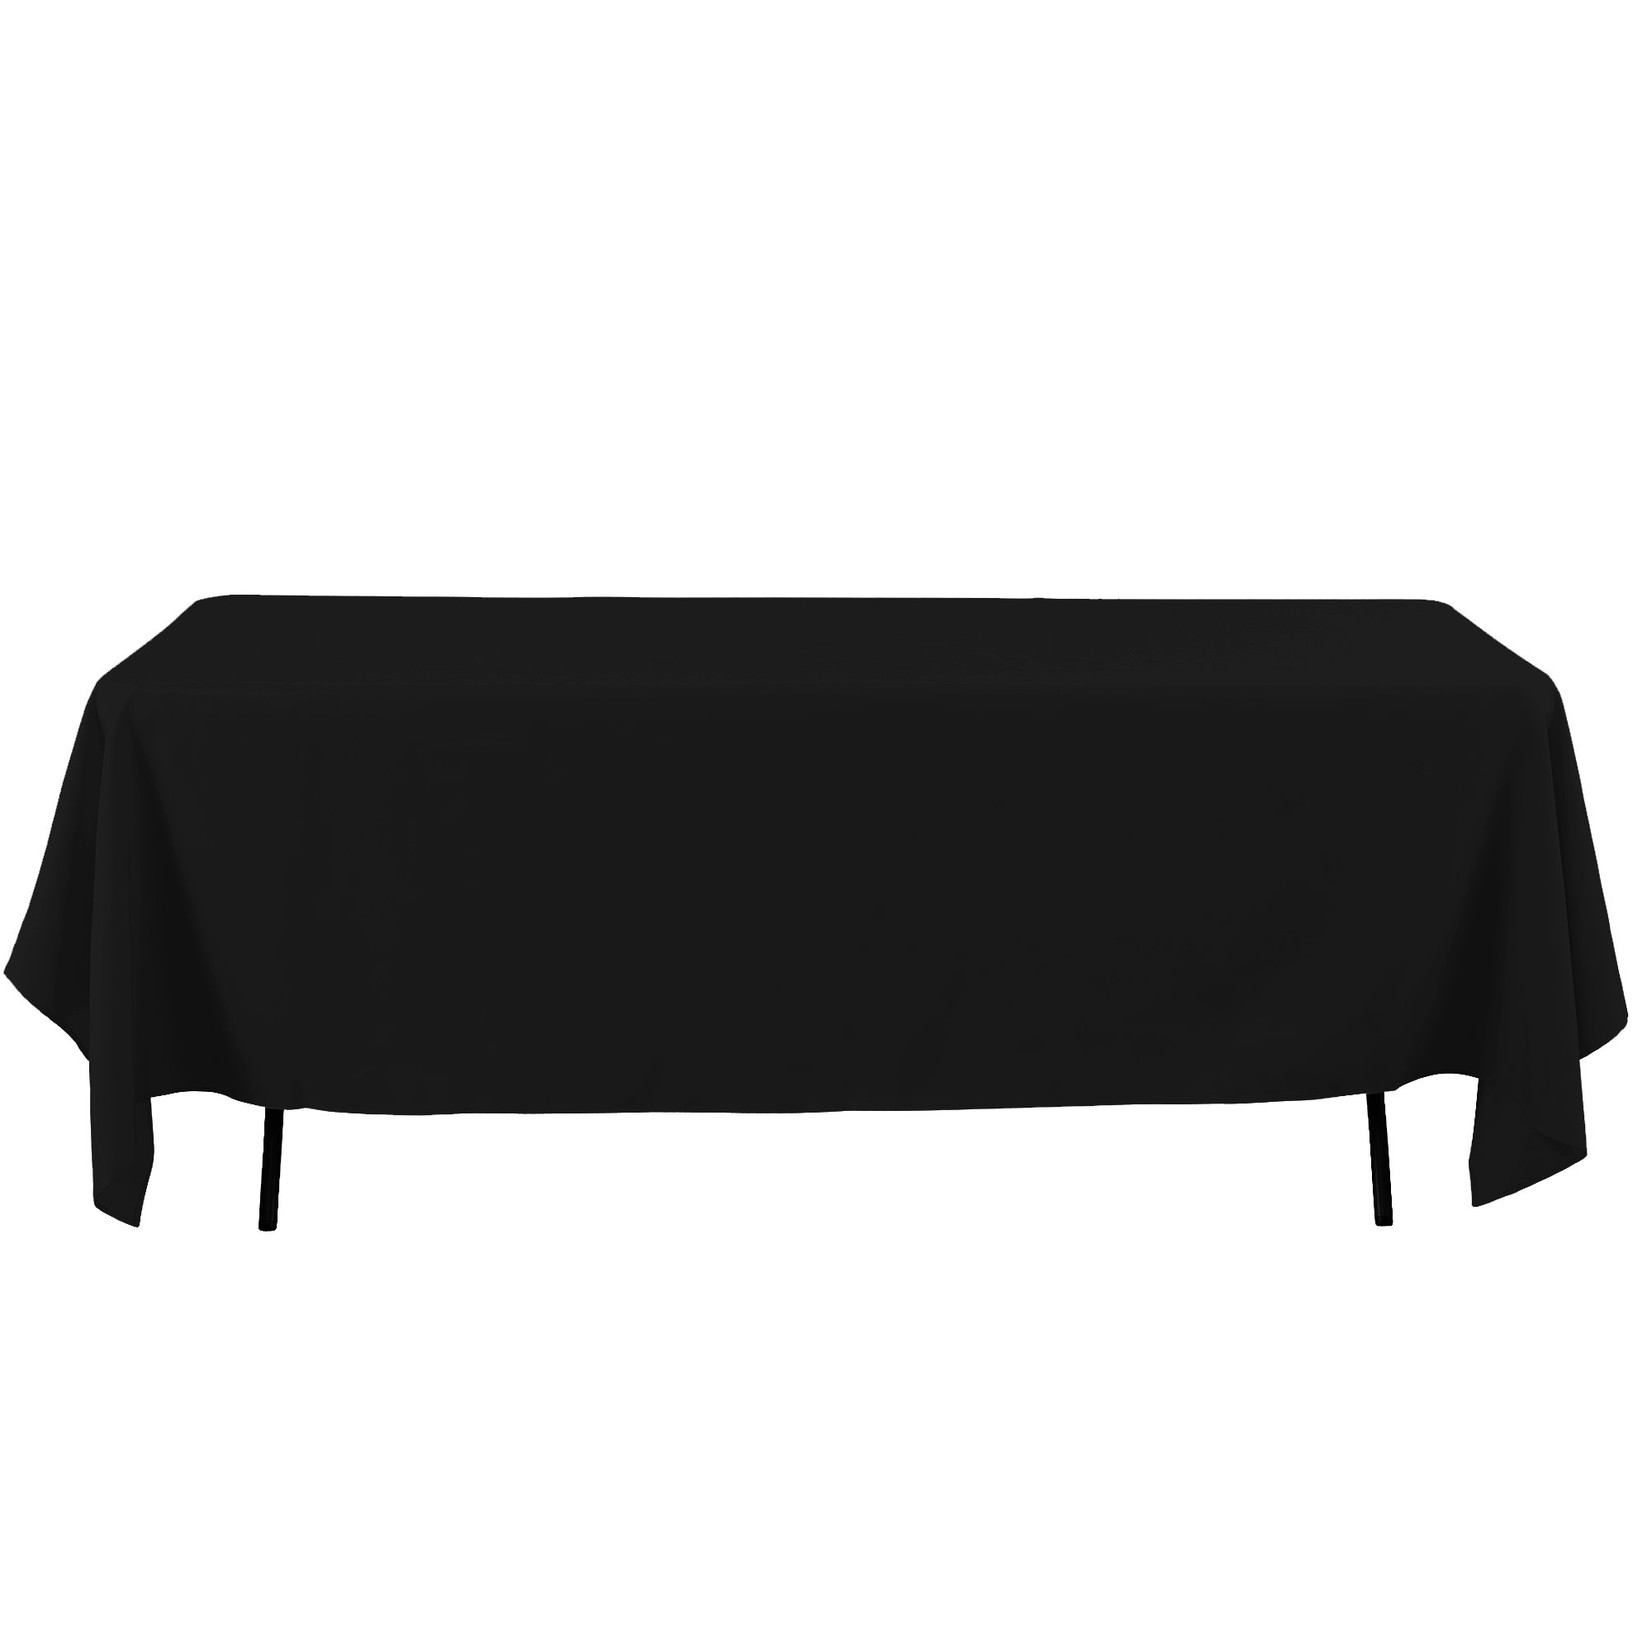 60X126'' RECTANGLE POLYESTER TABLE COVER, BLACK 38-0025BK